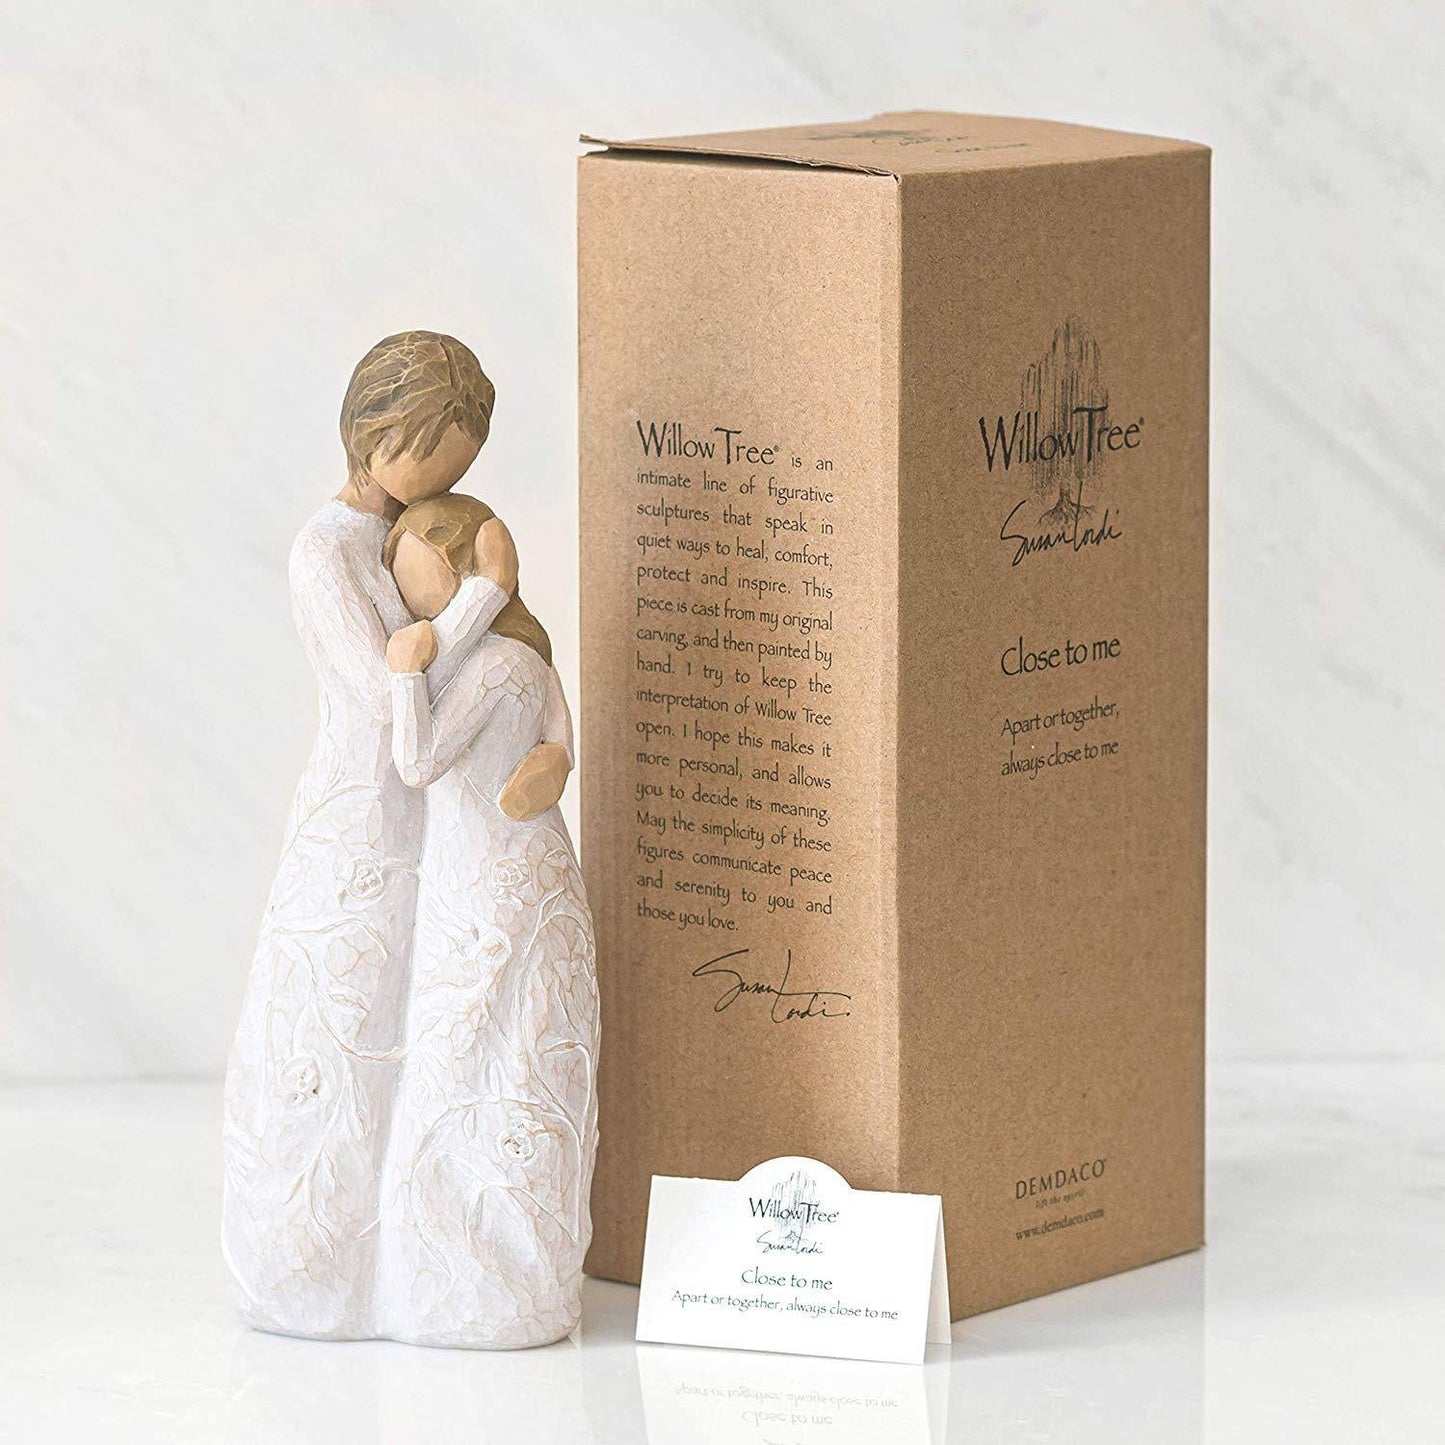 Mother of the Bride Gifts Sculpted Hand-Painted Figure - The Dress Outlet MOB